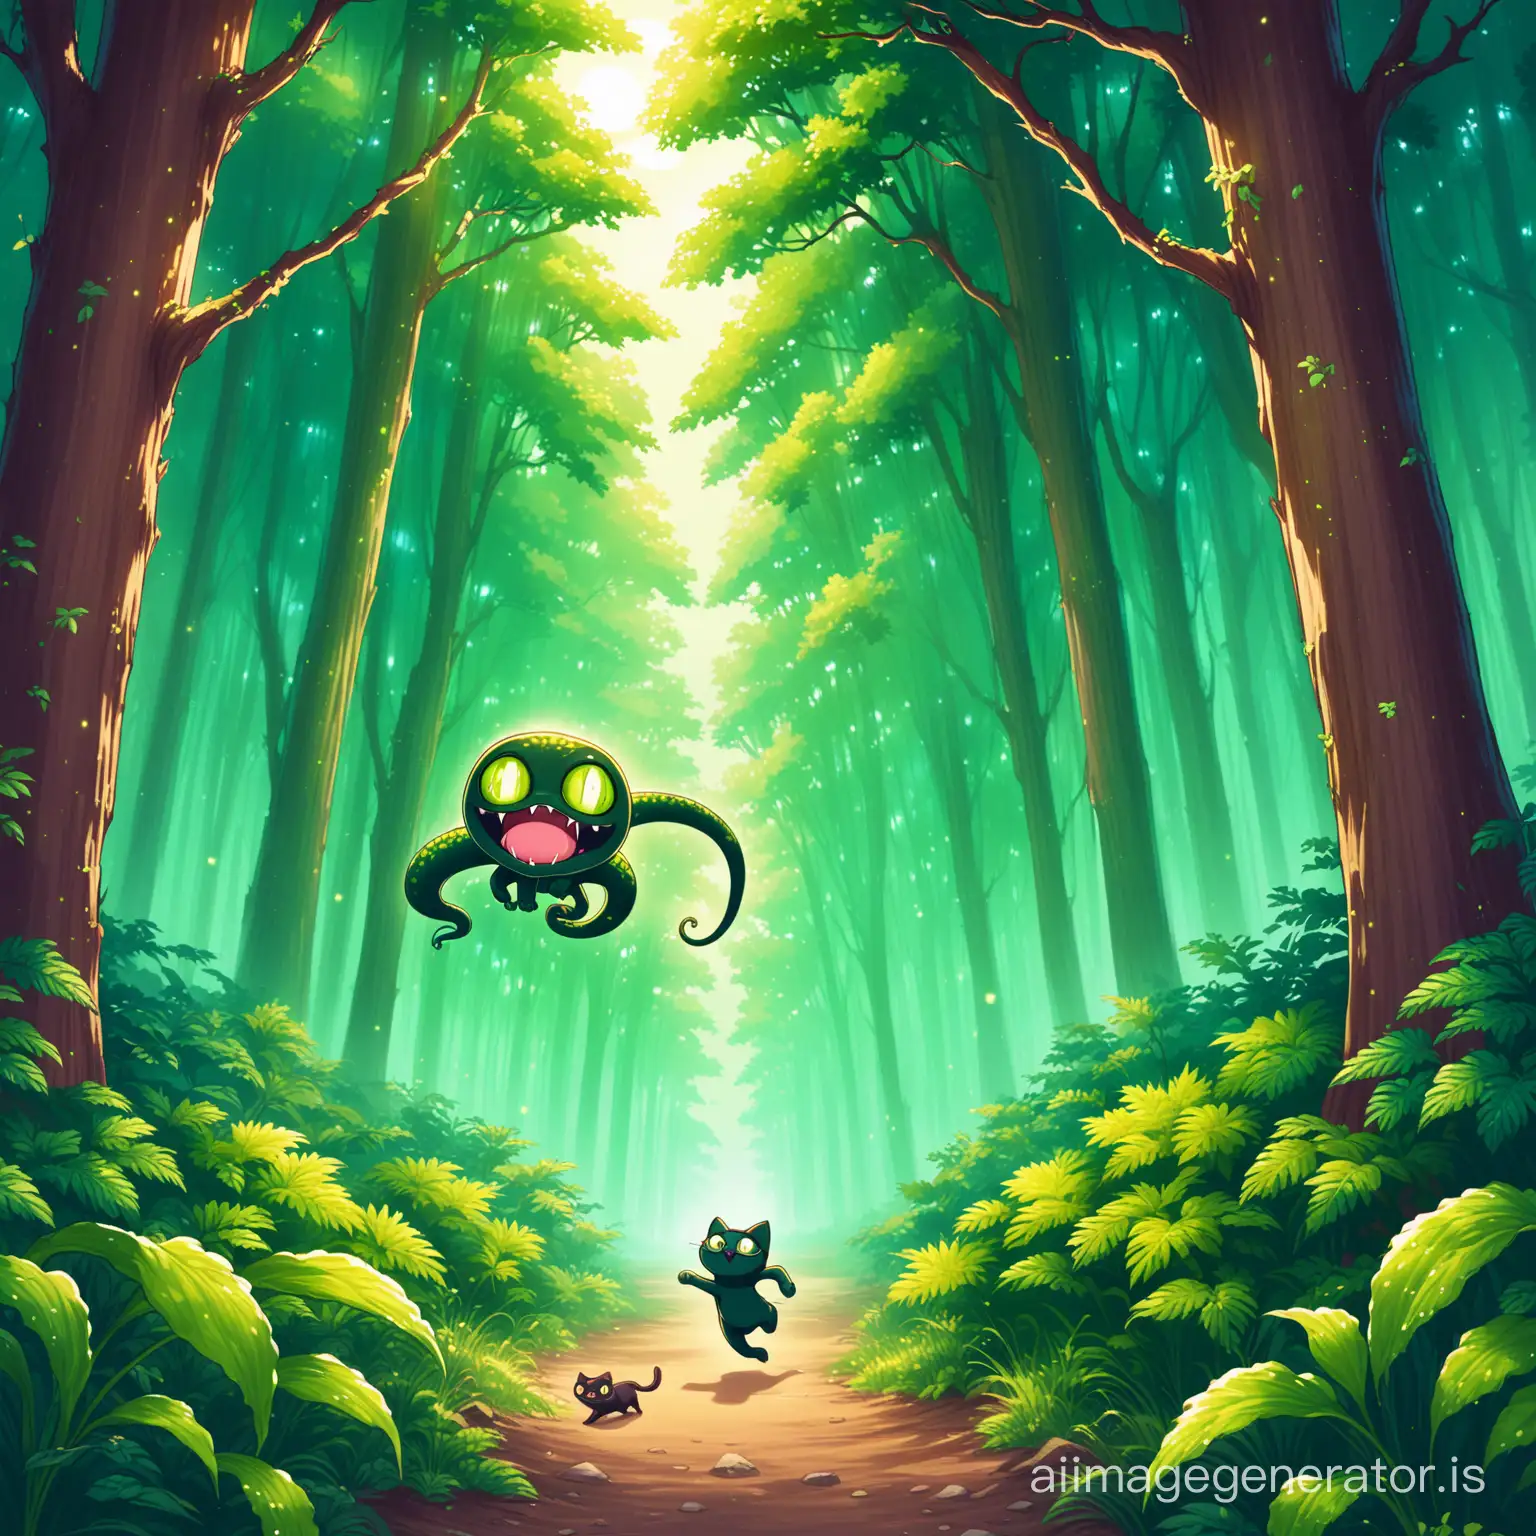 ThreeEyed-Snake-Alien-Chasing-Cat-in-Enchanted-Forest